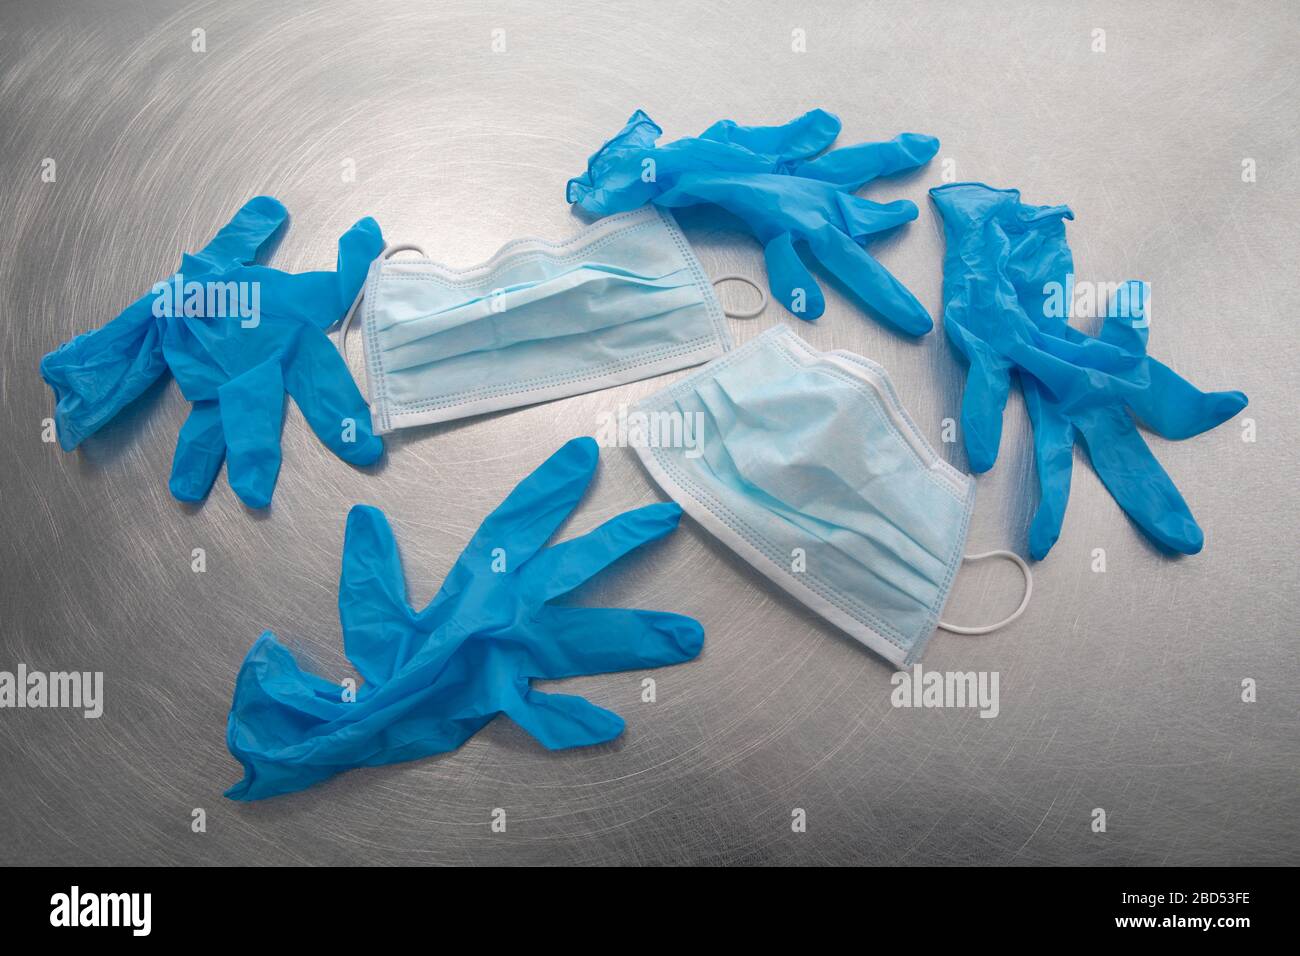 PPE GLOVES AND MASKS Stock Photo